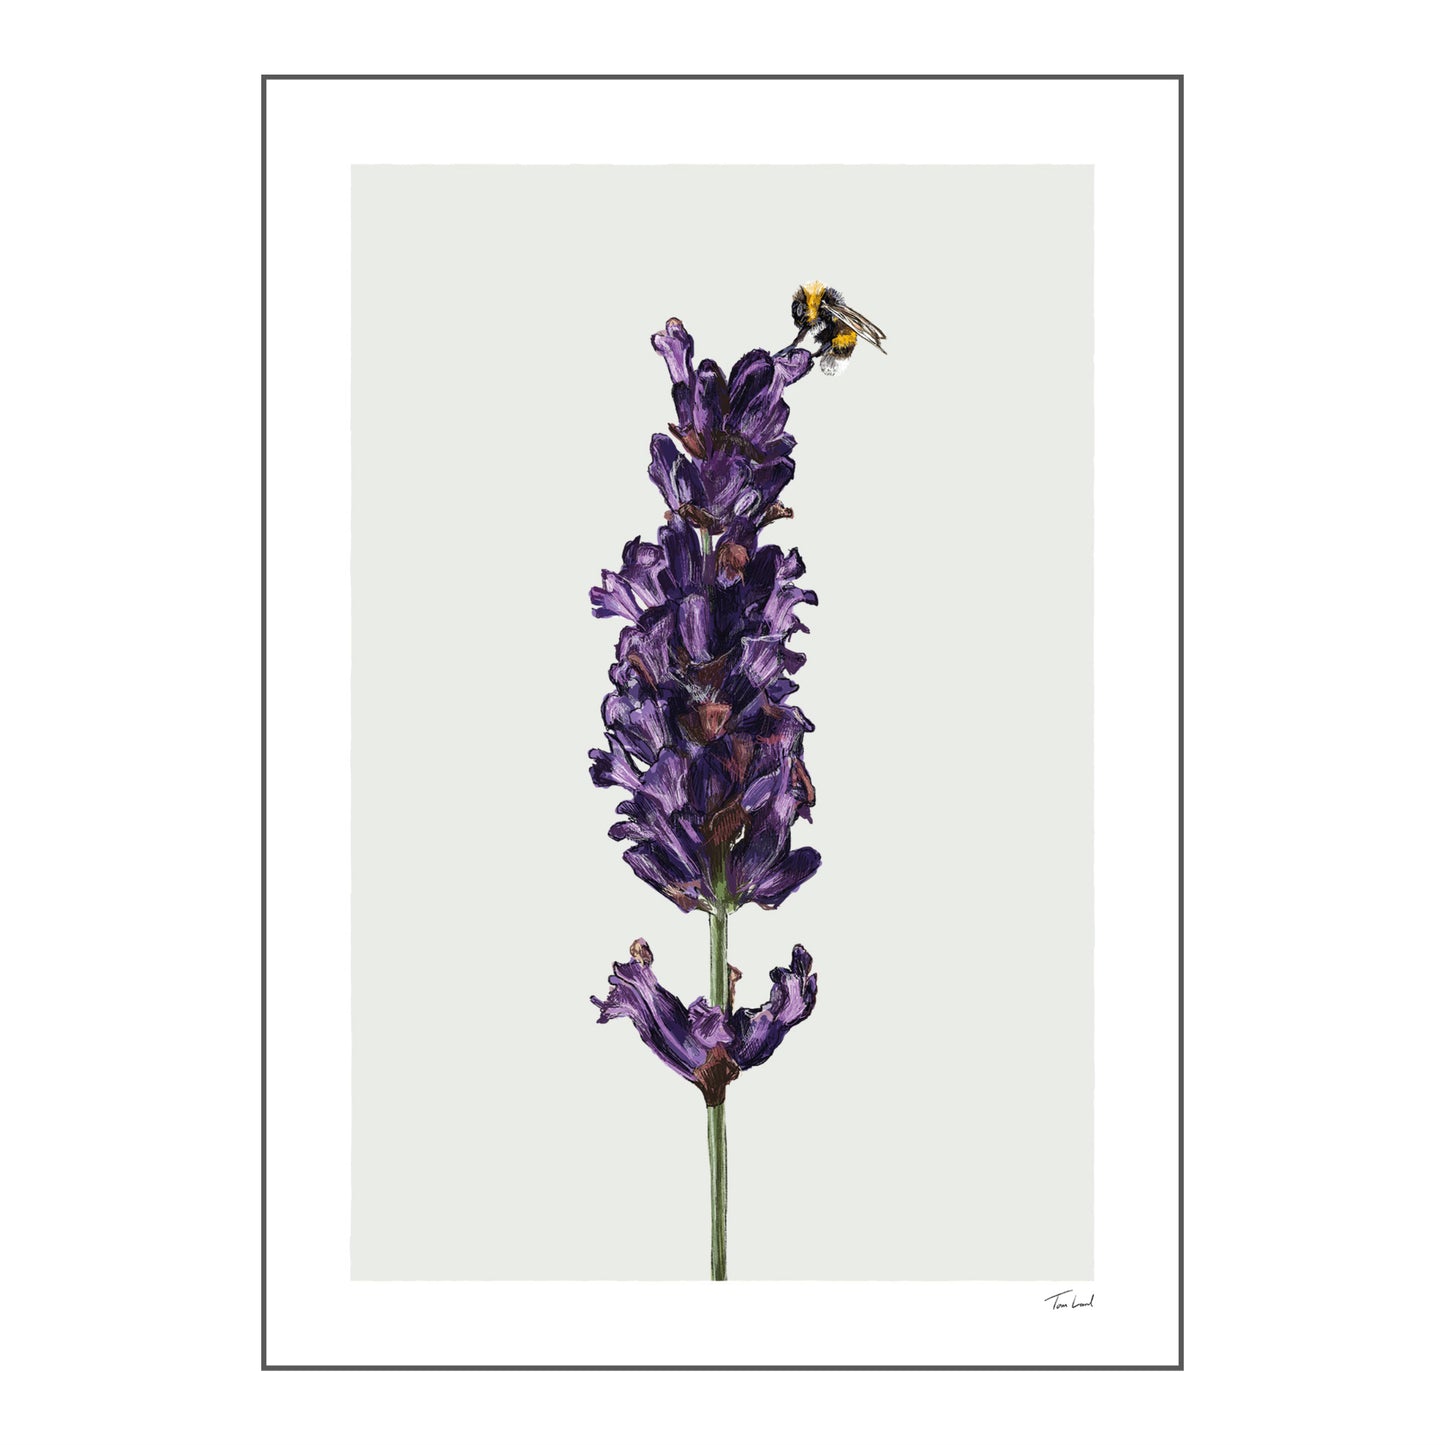 Lavender and Bee